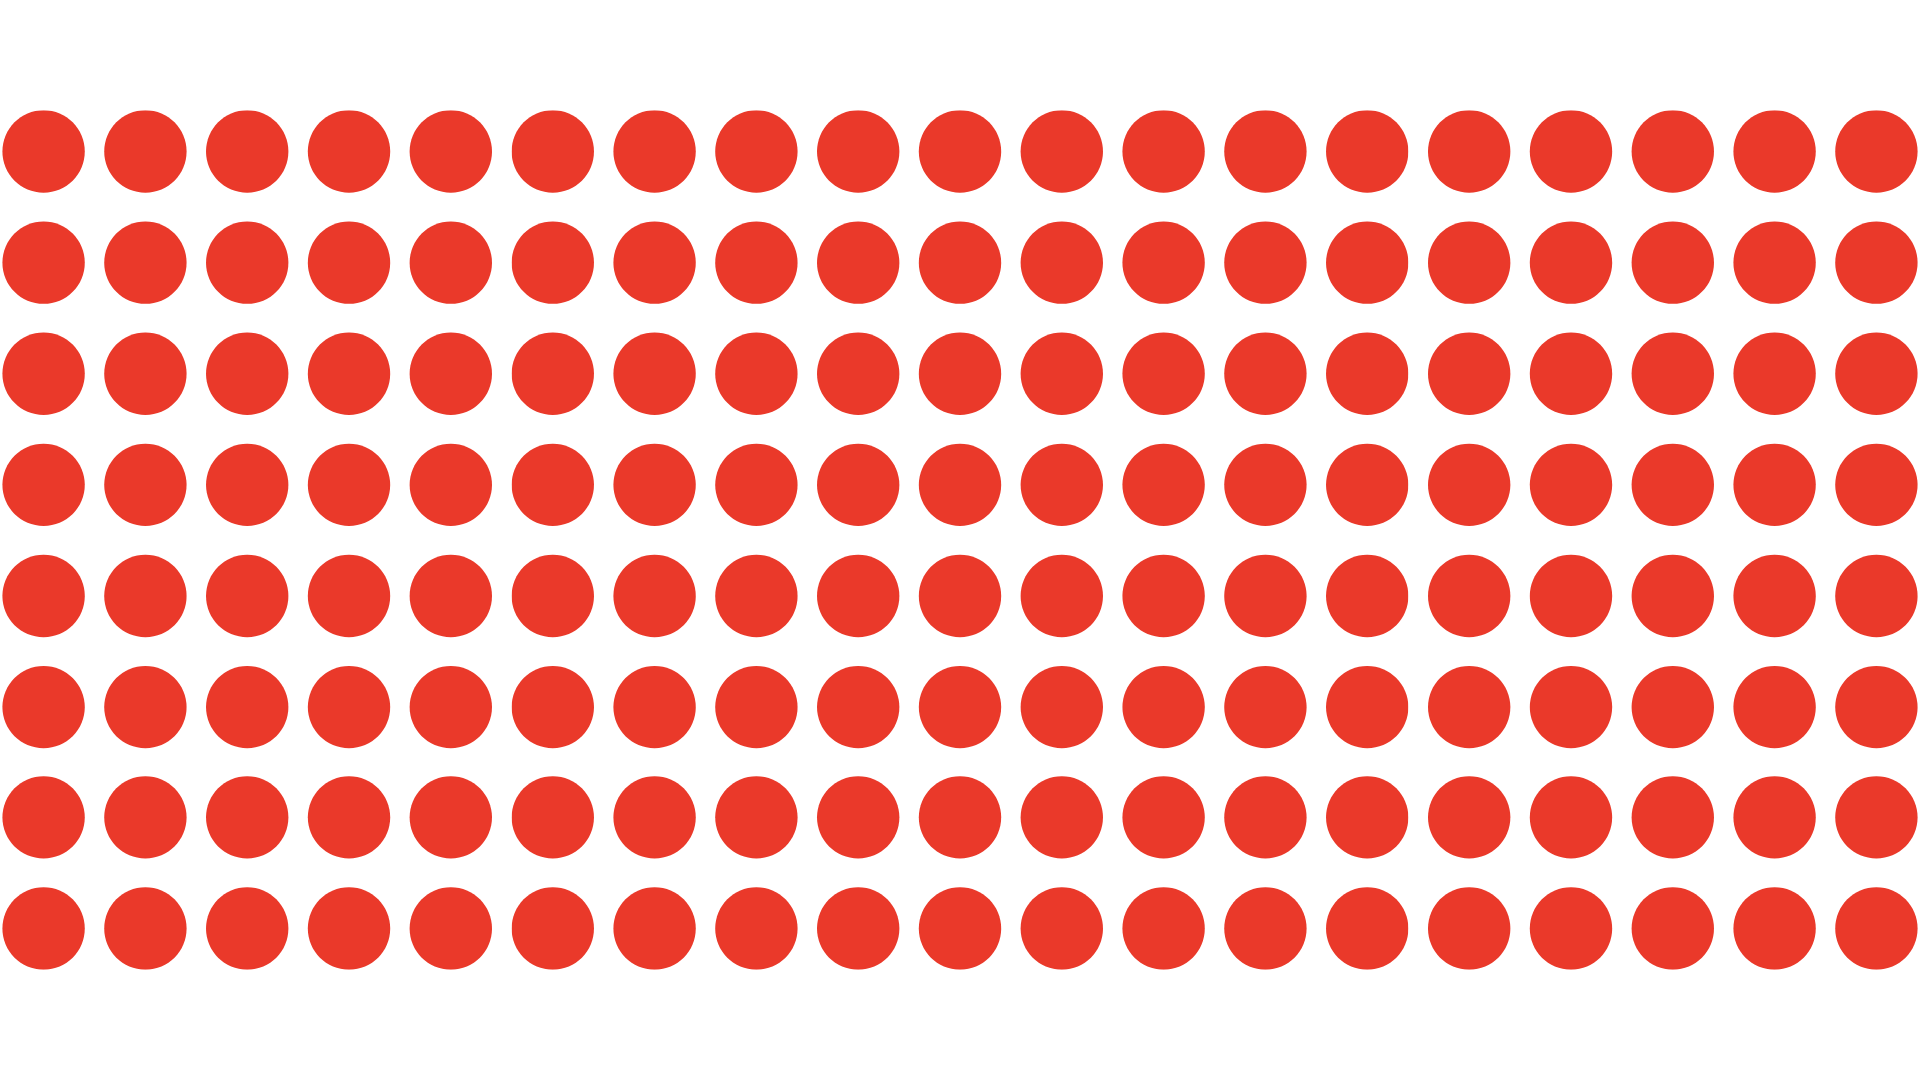 New Sensation Can Art Grid of Red Dots